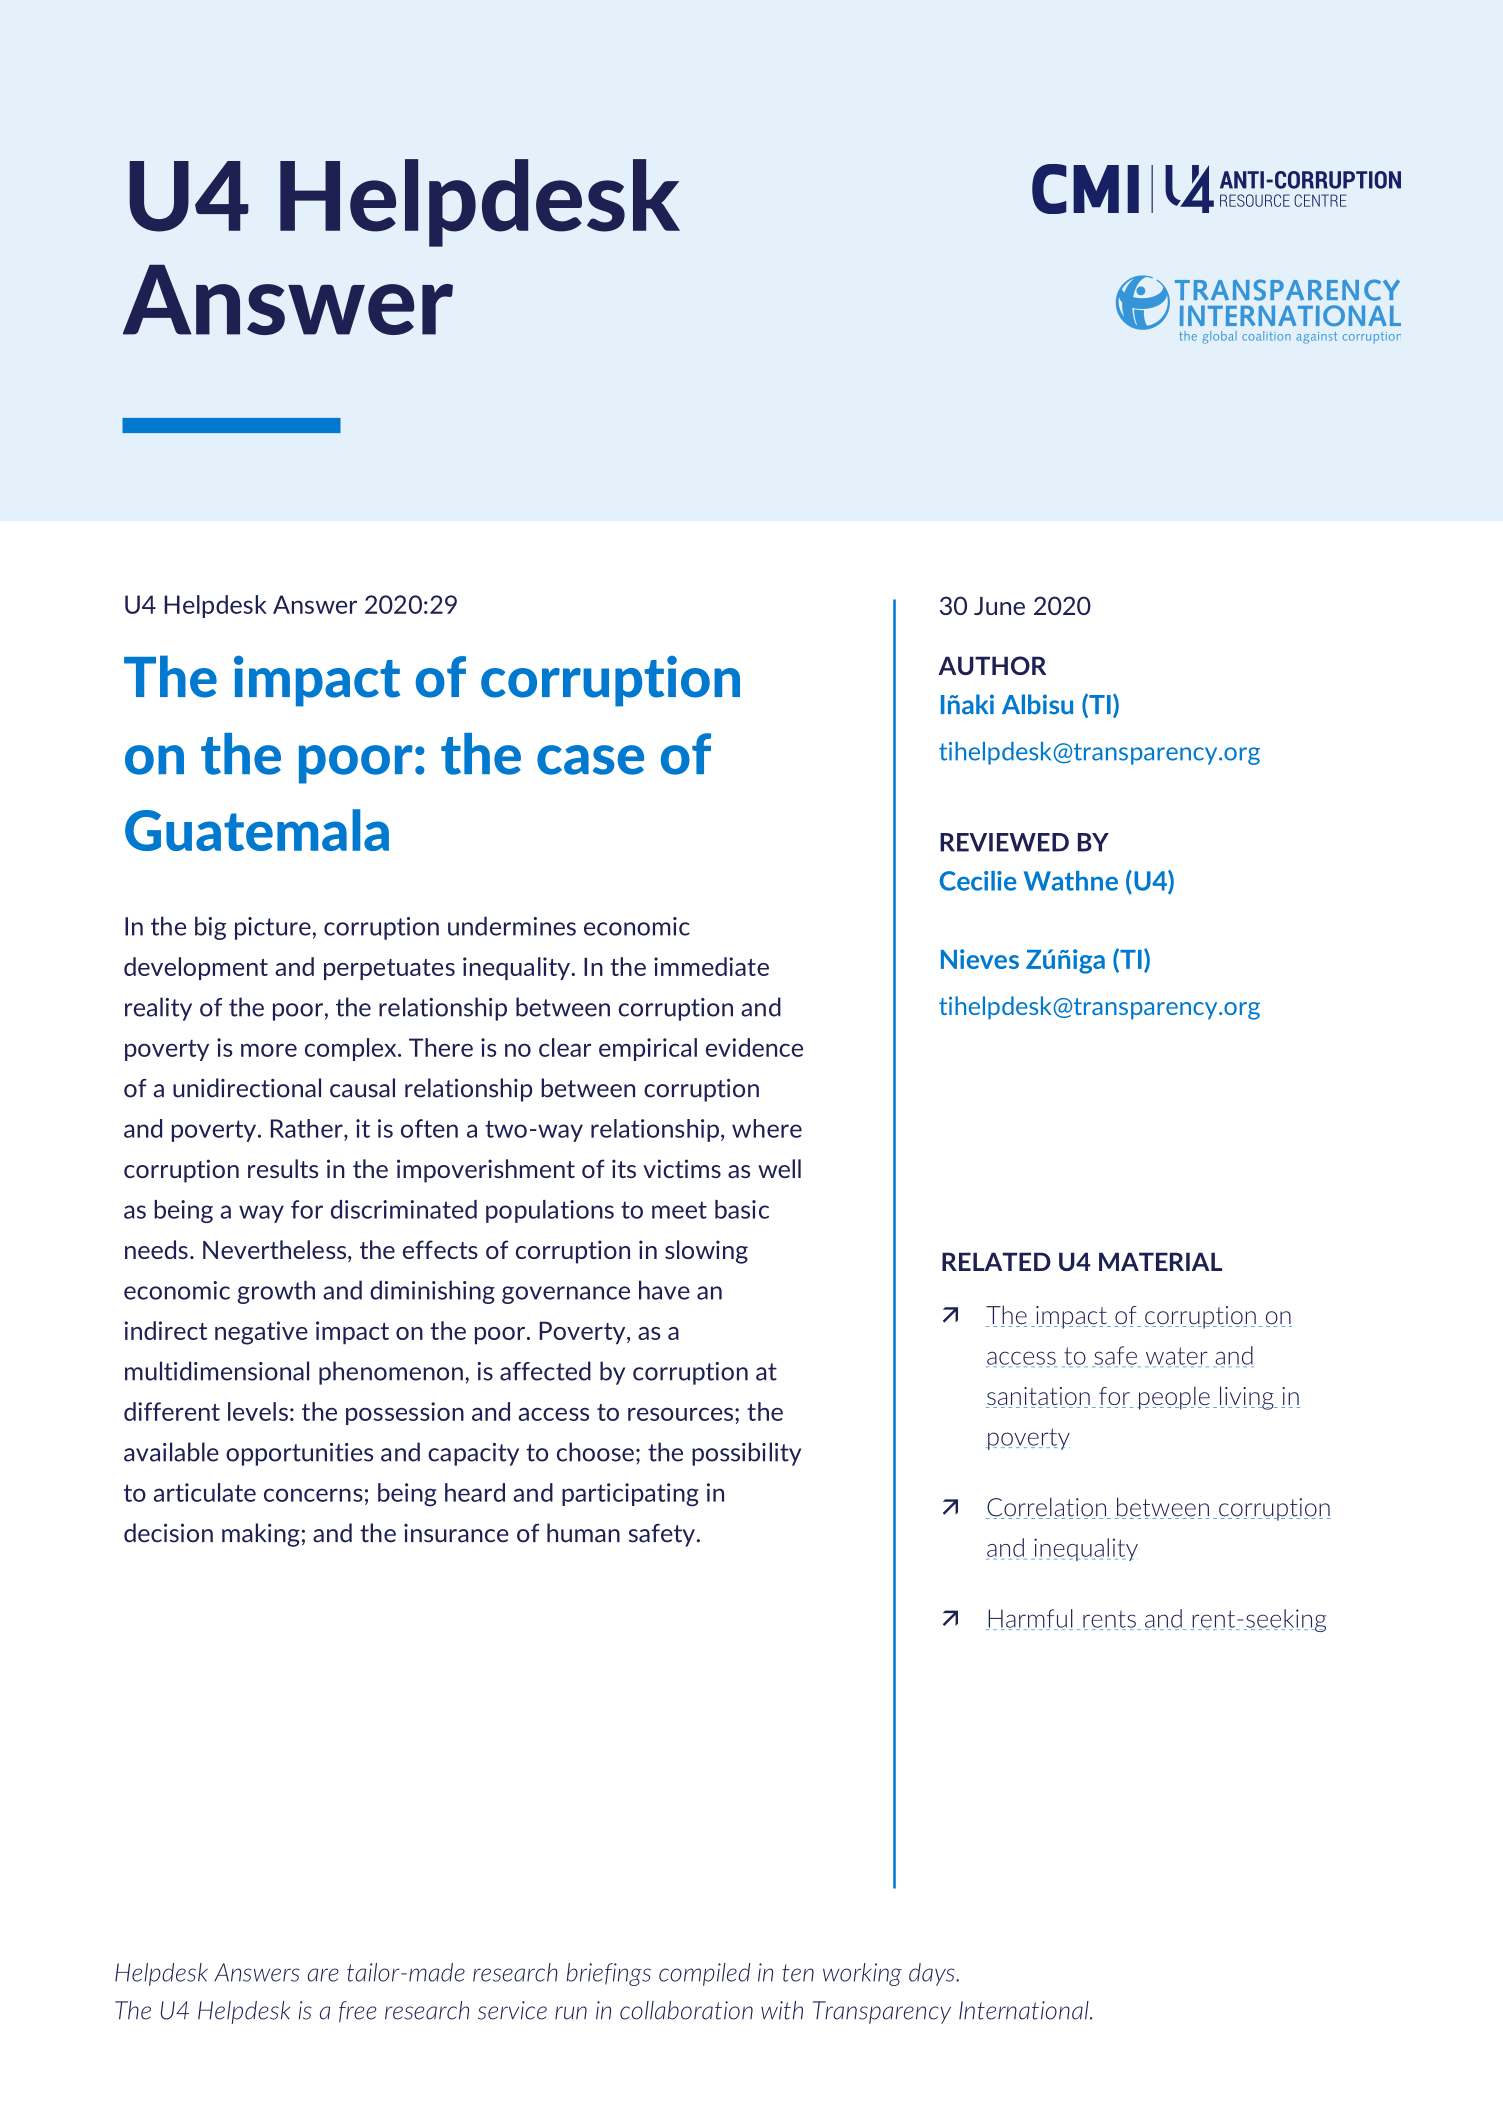 The impact of corruption on the poor: the case of Guatemala